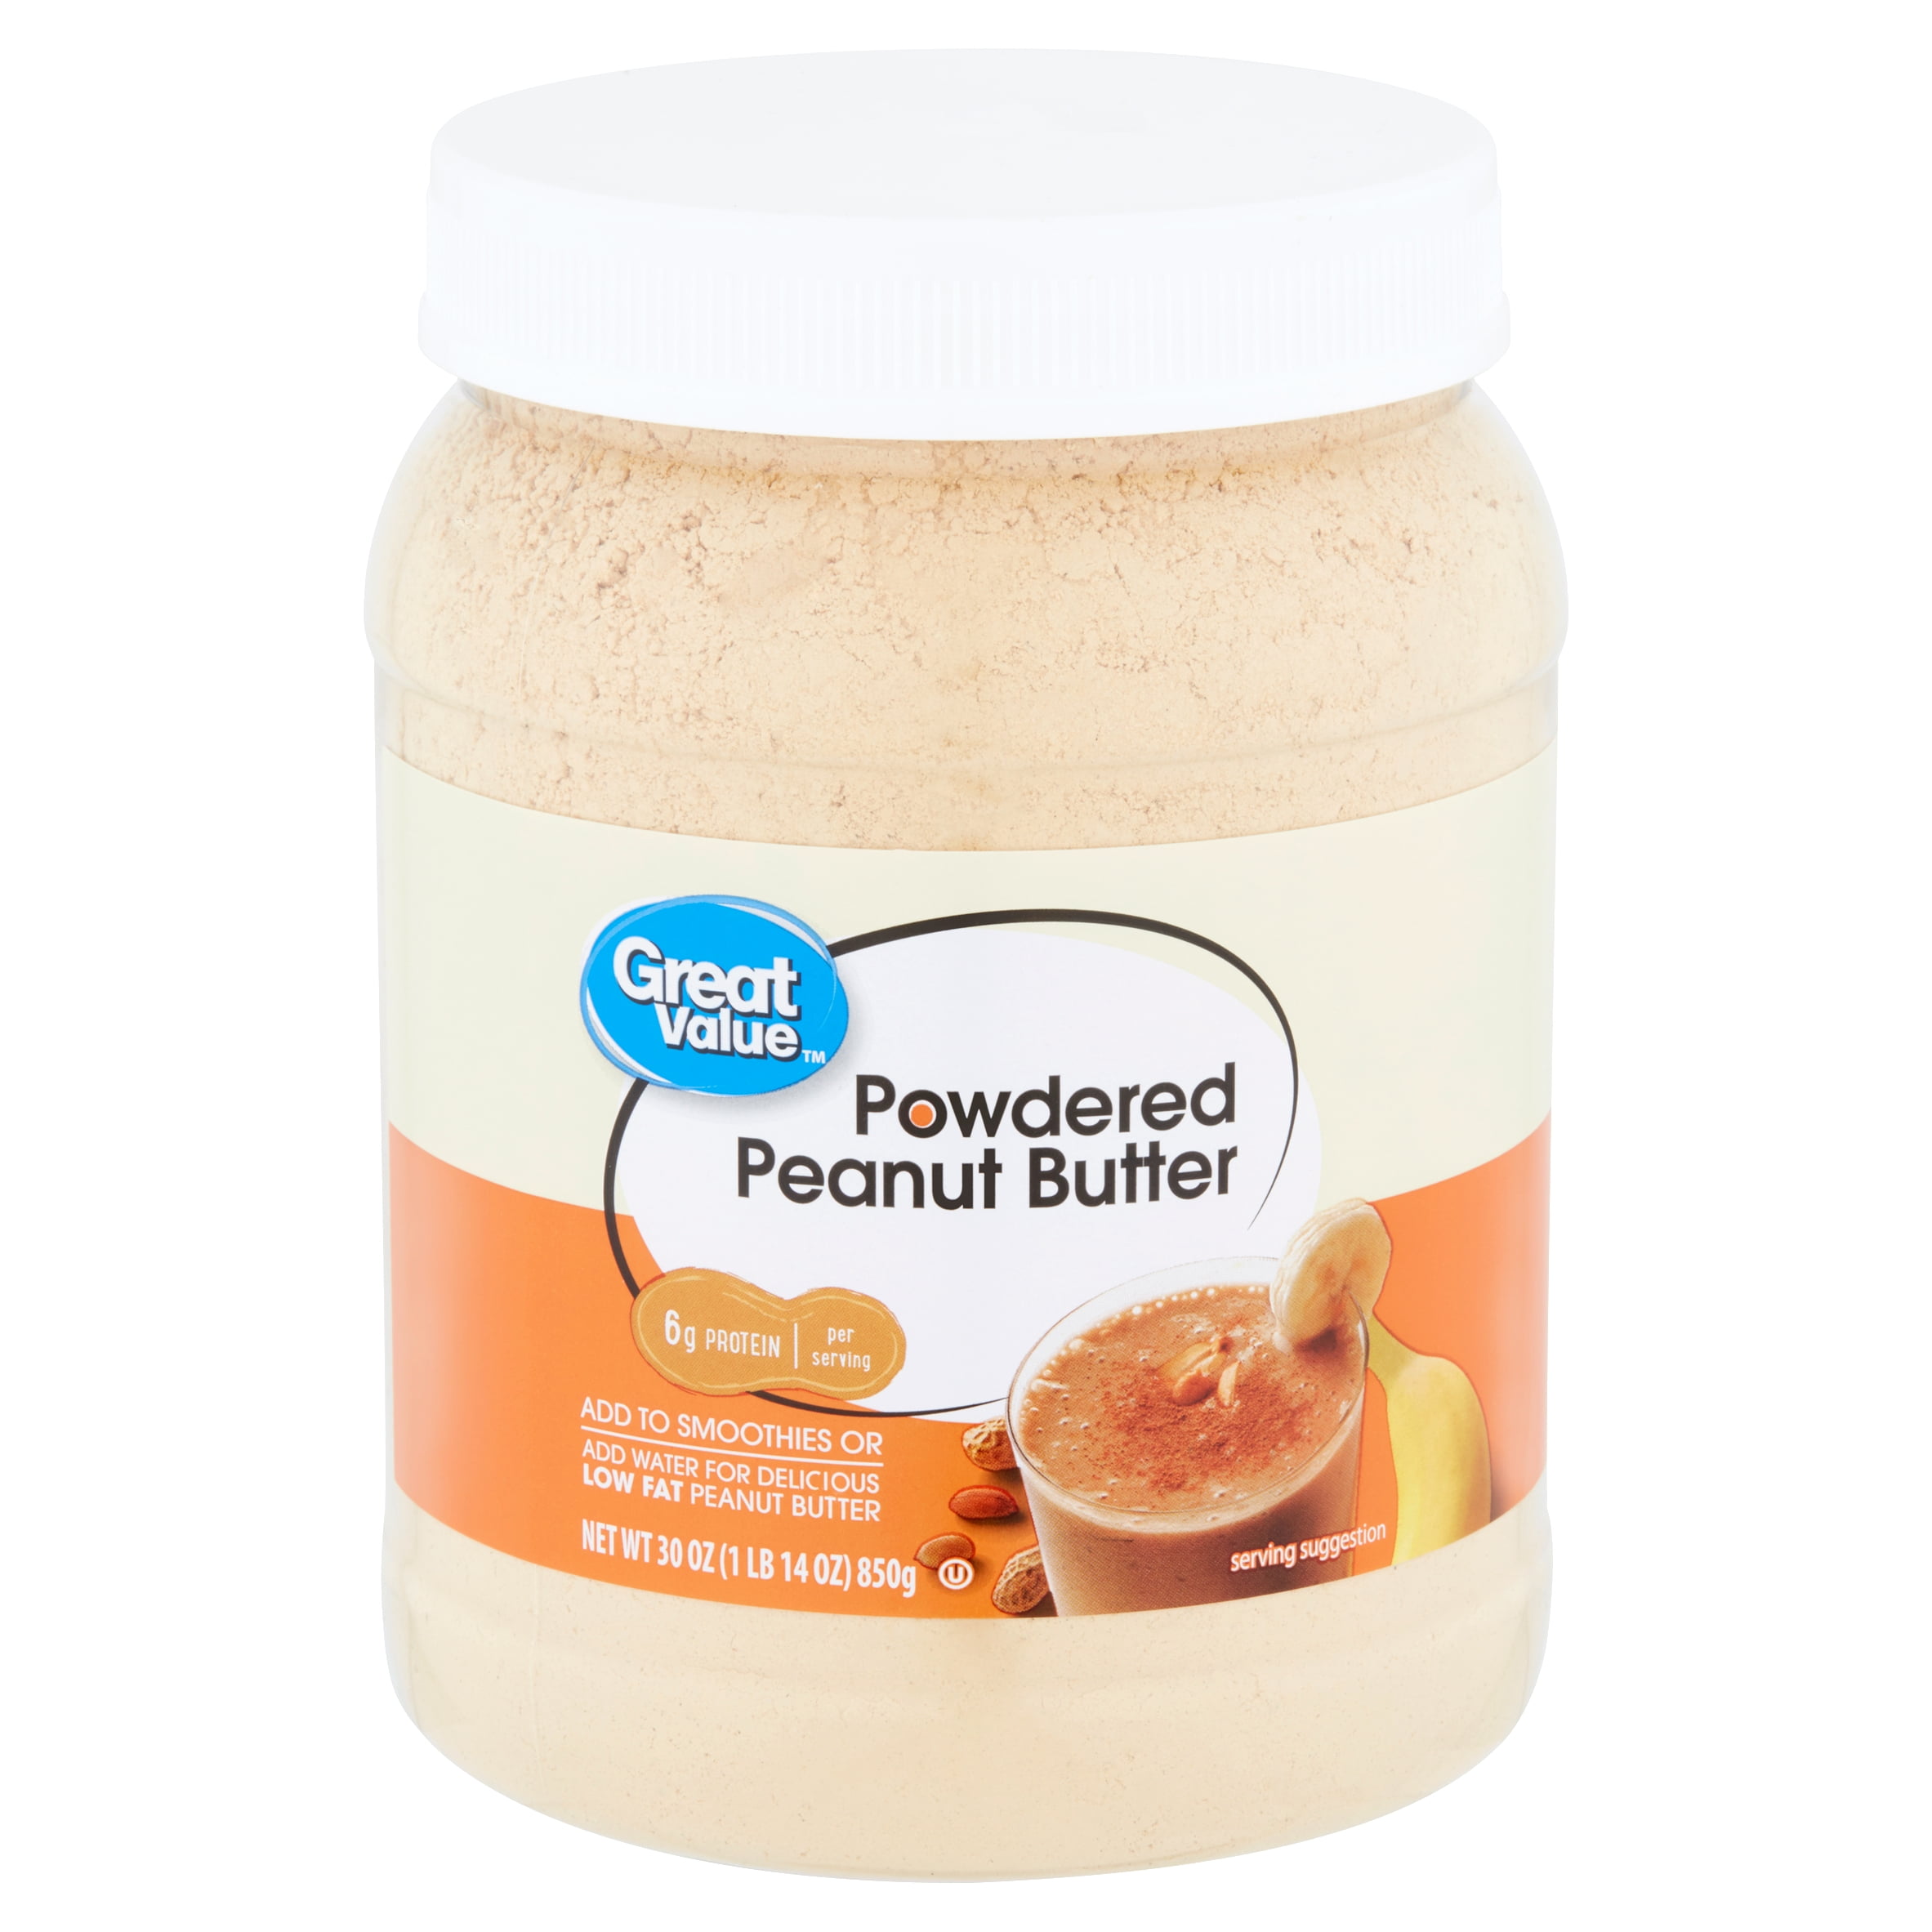 Great Value Powdered Peanut Butter, 30 